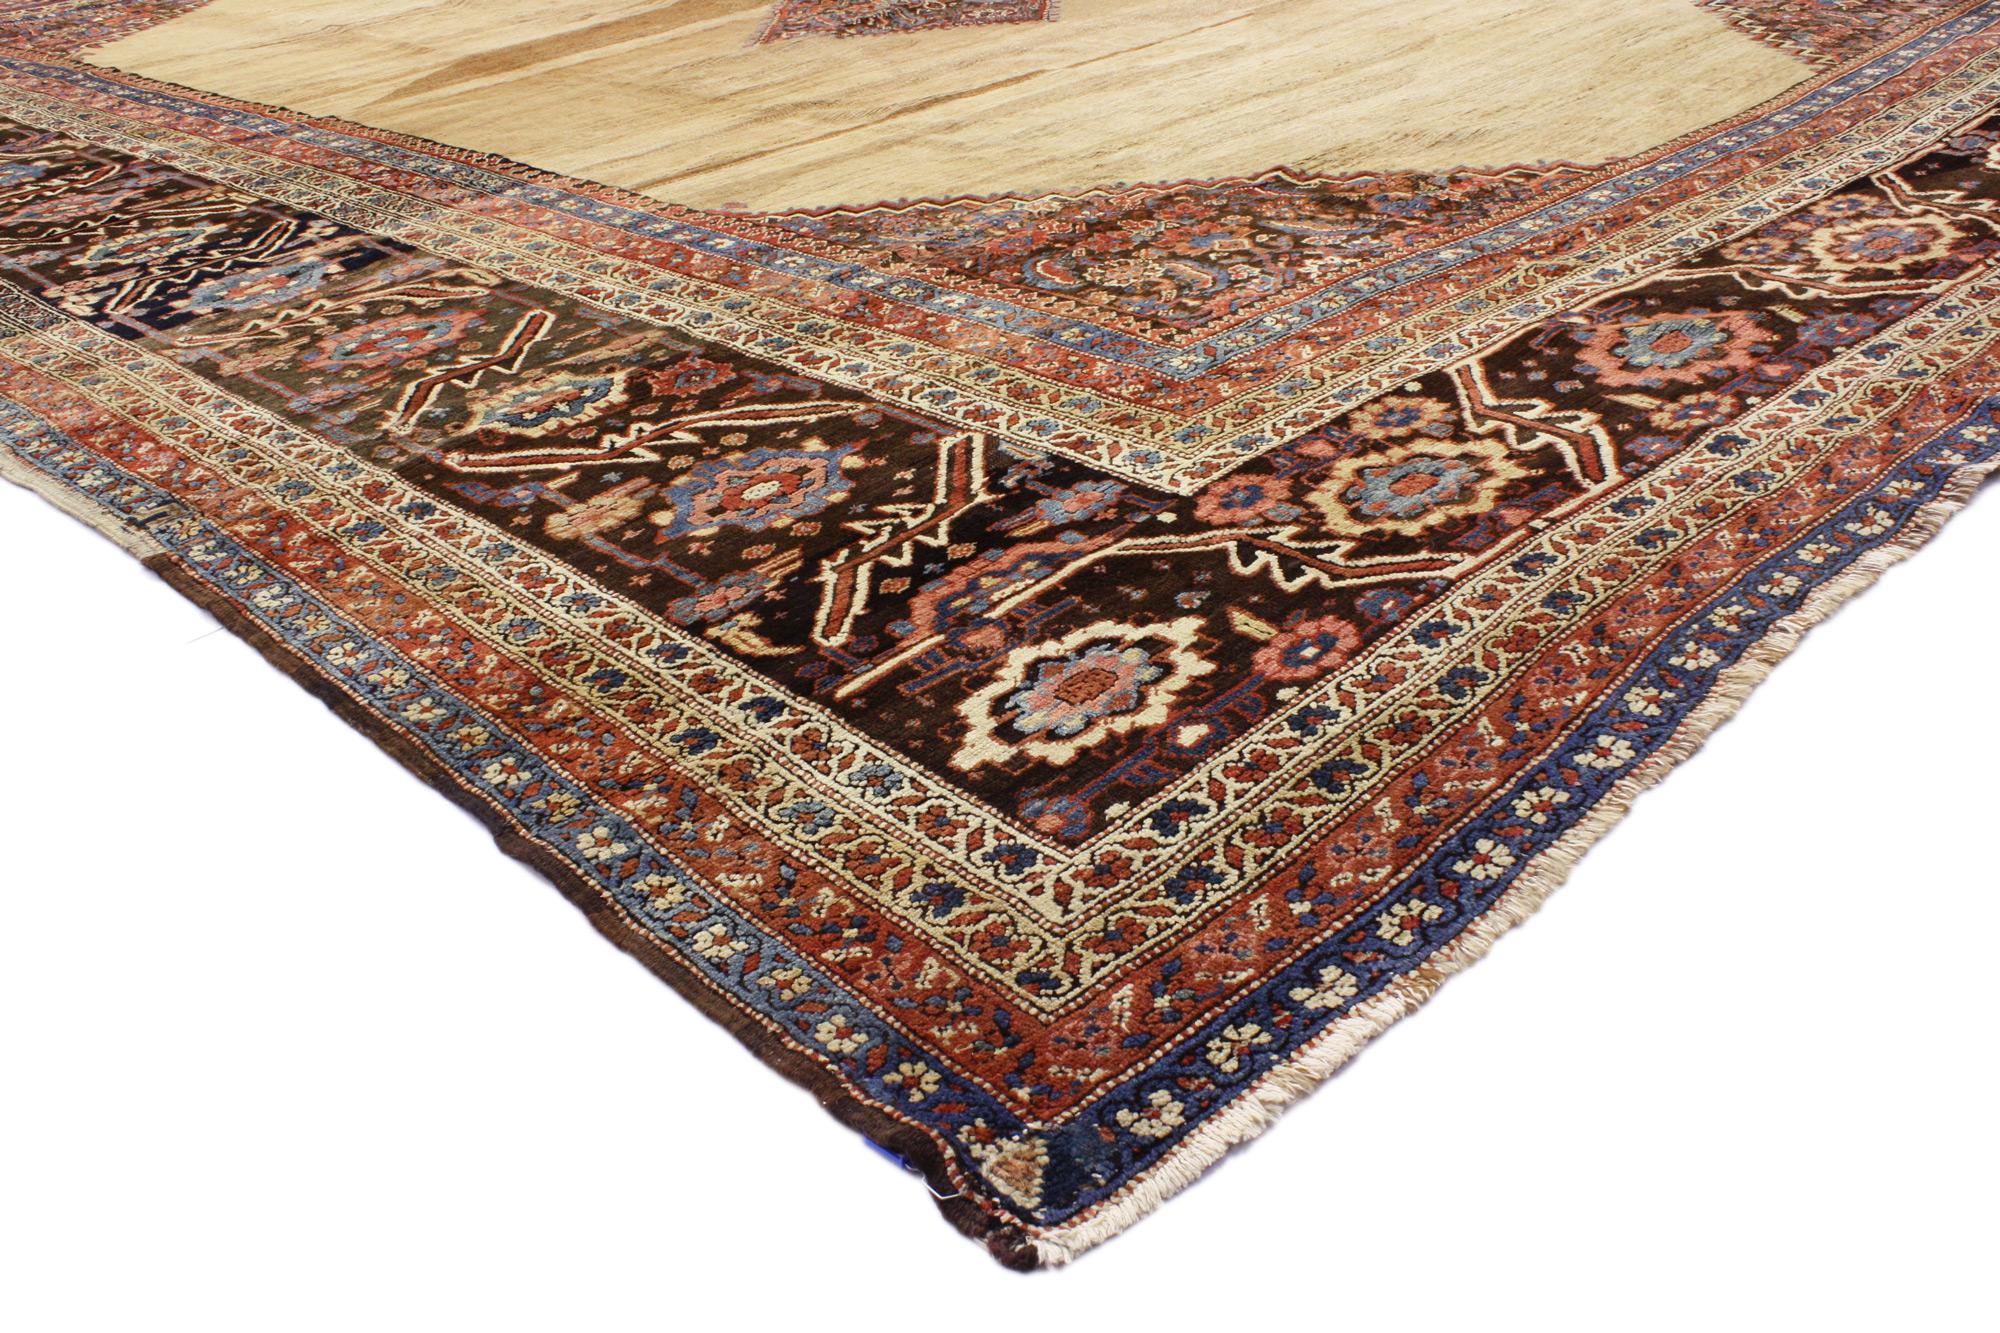 73055 Oversized Antique Persian Bakshaish Rug, 14'06 x 19'00. 
Rich in color with beguiling beauty, this hand knotted wool oversized antique Persian Bakshaish rug will take on a curated lived-in look that feels timeless while imparting a sense of